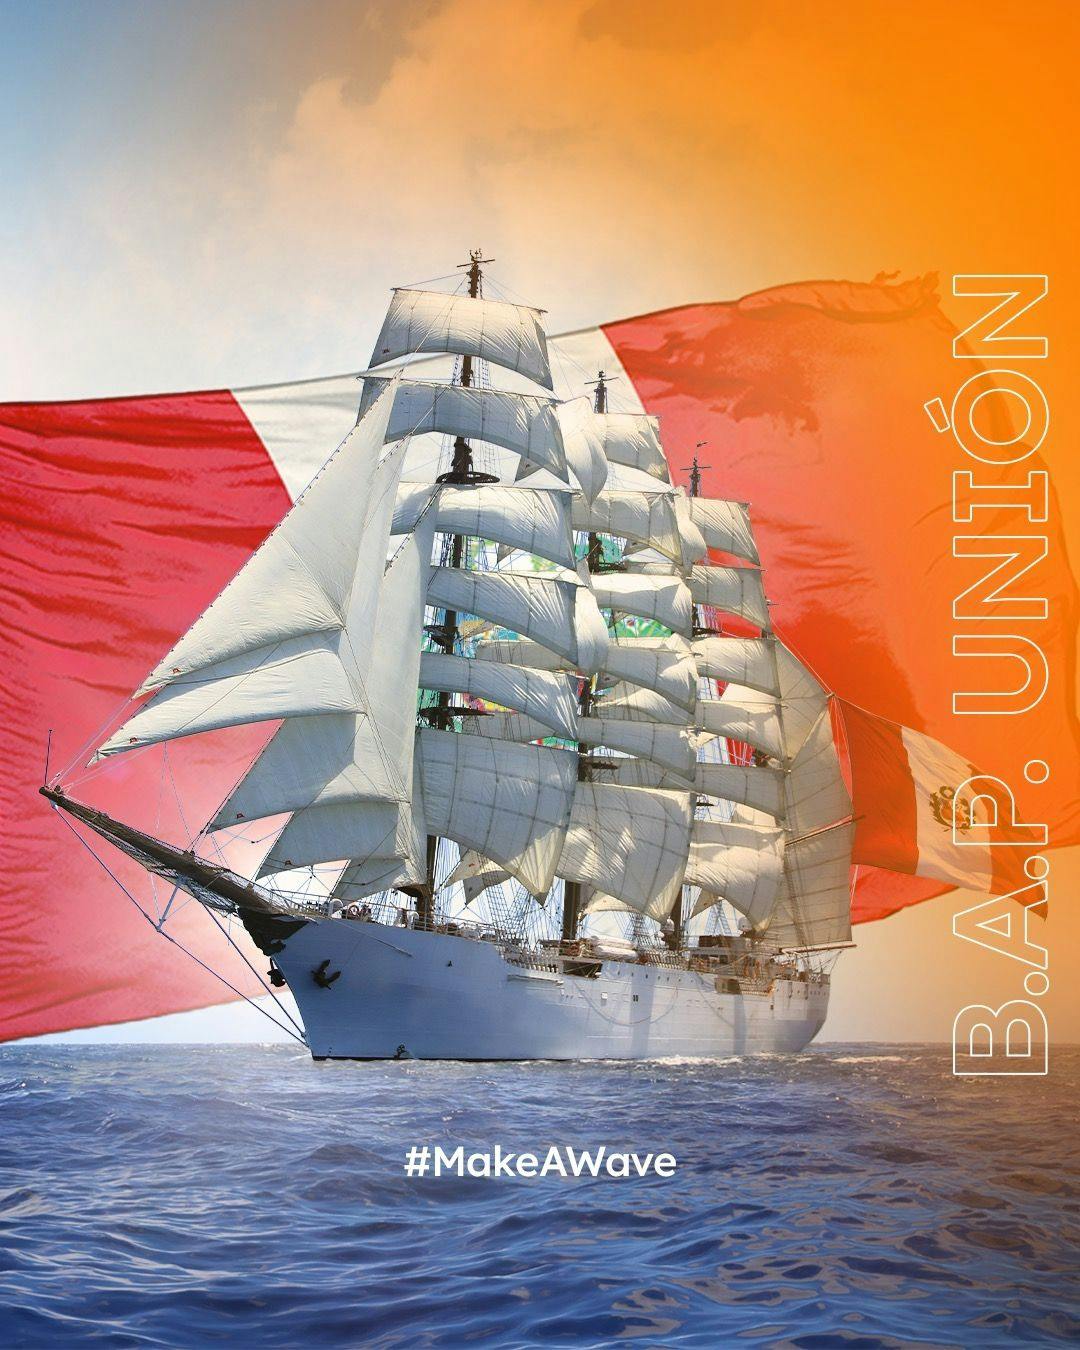 Uniting Wavemakers around the globe: Holis Peru! 🇵🇪⛵️ One of the first ships f...